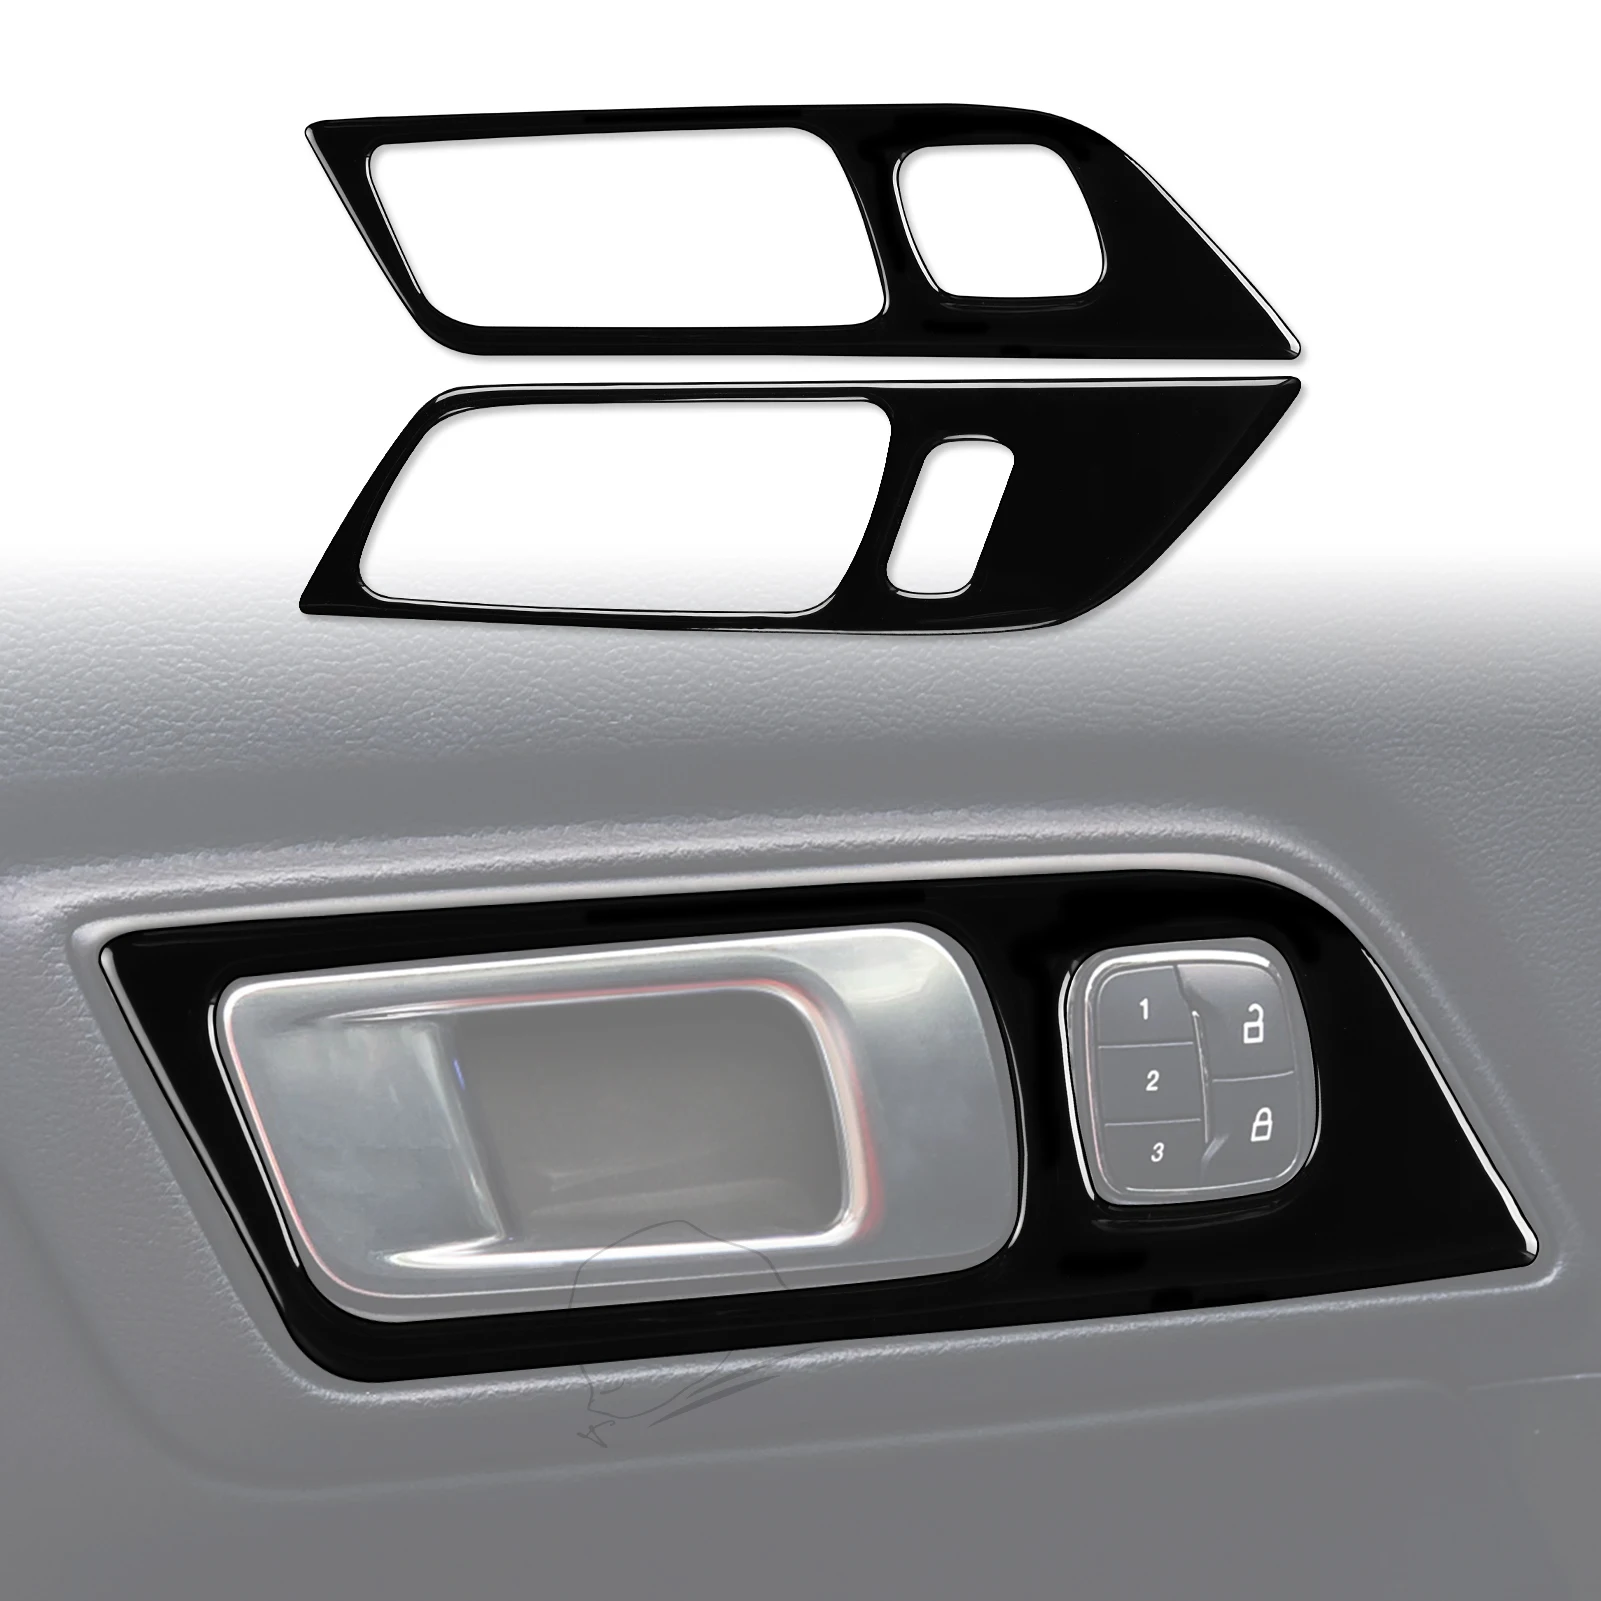 

for Ford Mustang 2015 2016 2017 2018 2019 2020 Door Plank Decoration Cover Trim Sticker Car Accessories Plastic